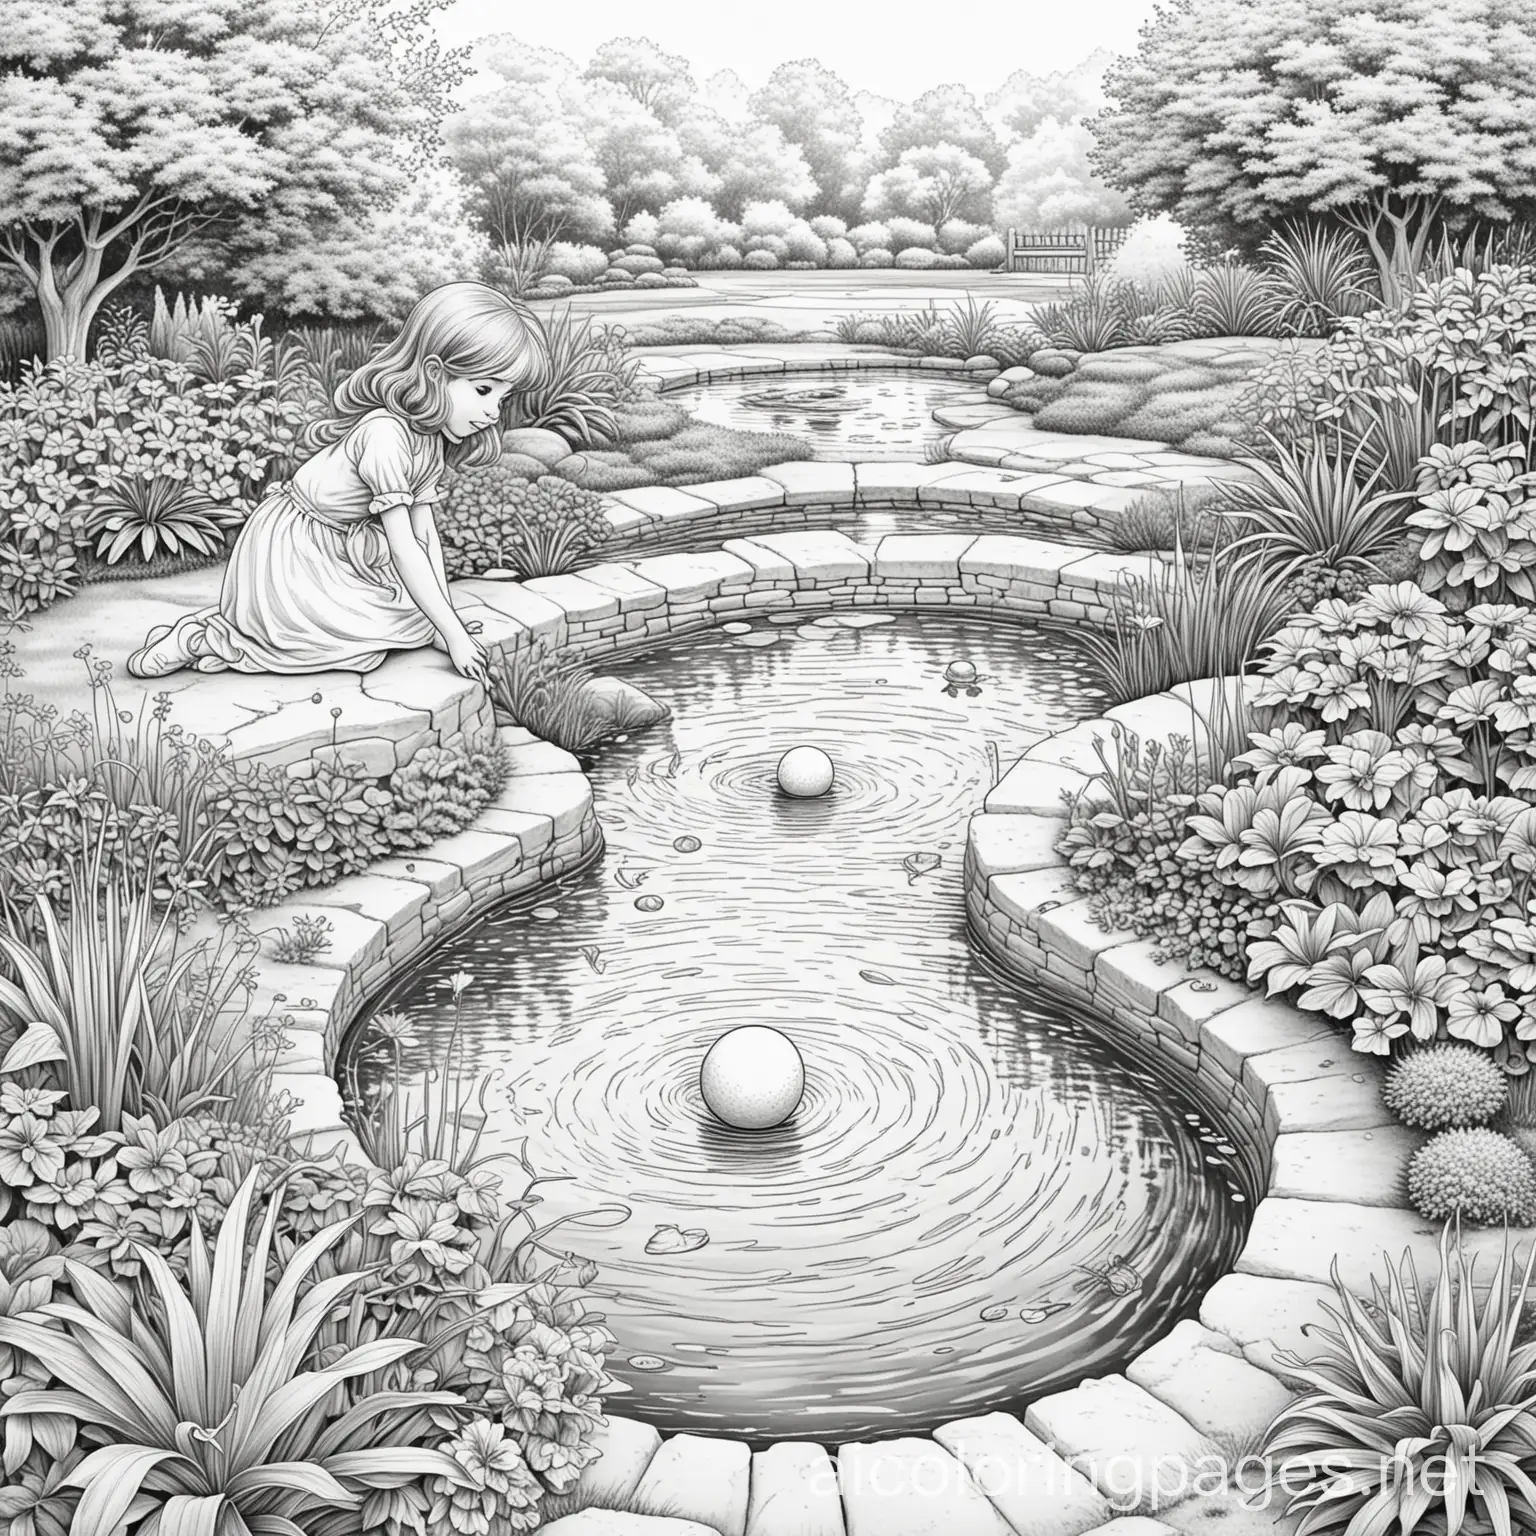 princess playing with one ball in a garden with a pond in the middle
, Coloring Page, black and white, line art, white background, Simplicity, Ample White Space. The background of the coloring page is plain white to make it easy for young children to color within the lines. The outlines of all the subjects are easy to distinguish, making it simple for kids to color without too much difficulty